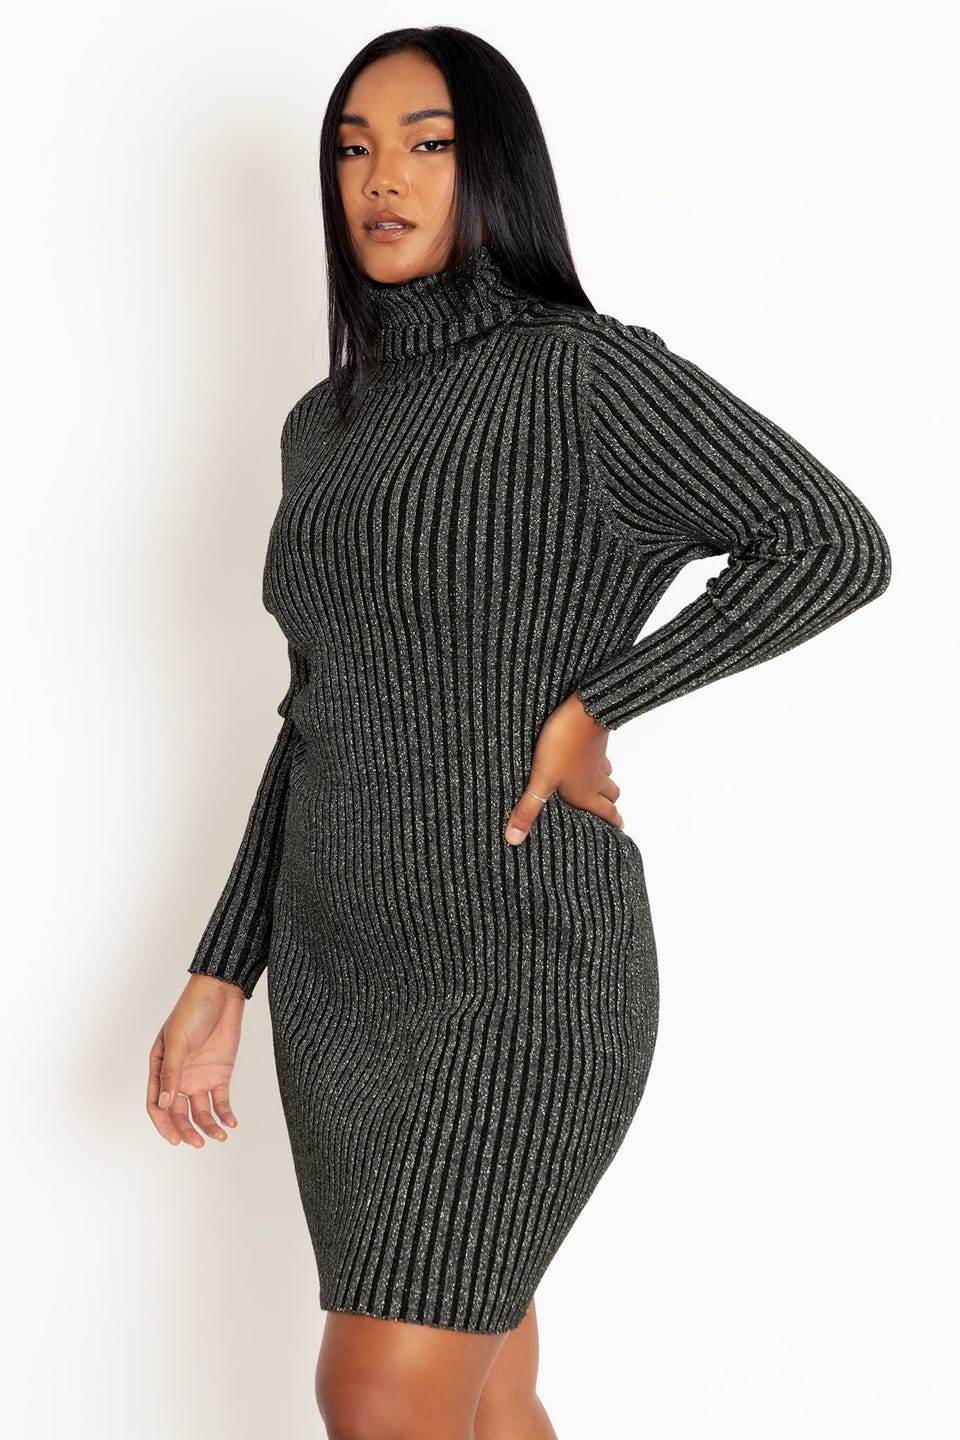 Winter Party Rib Dress - Limited